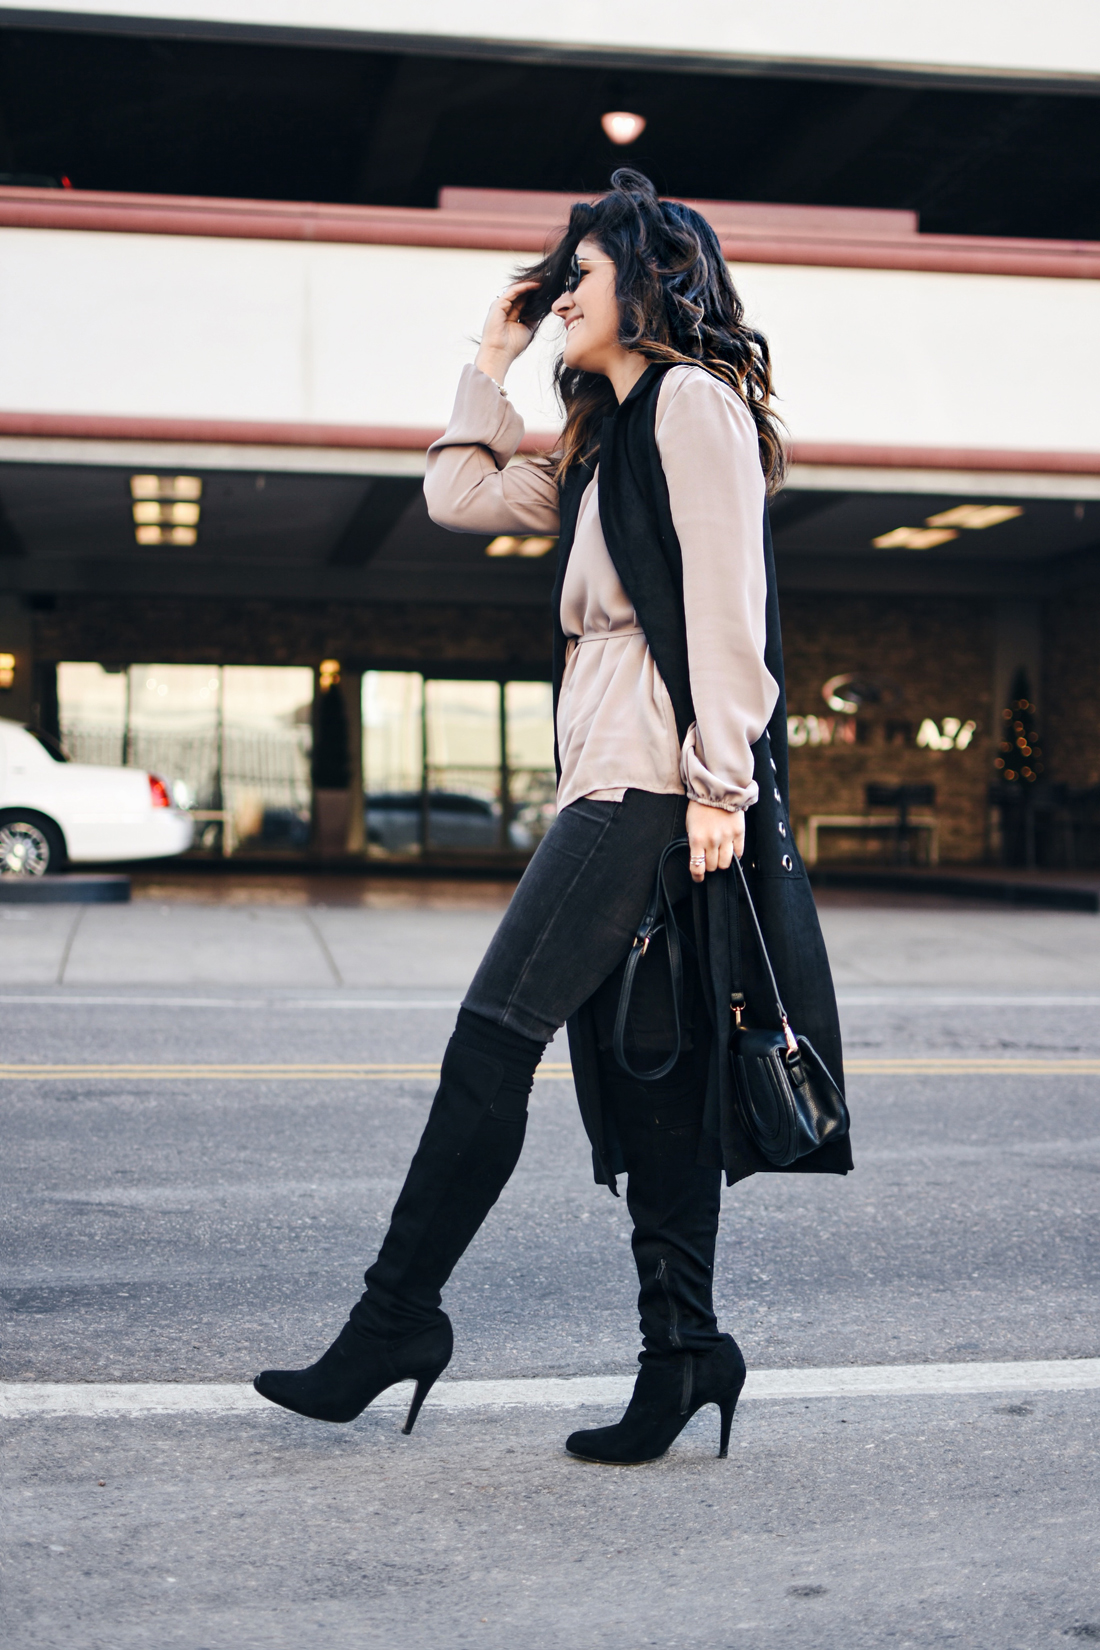 Carolina Hellal of Chic Talk wearing a VIPme black long vest, Forever21 top, Over the knee boots, and Rayban sunglasses